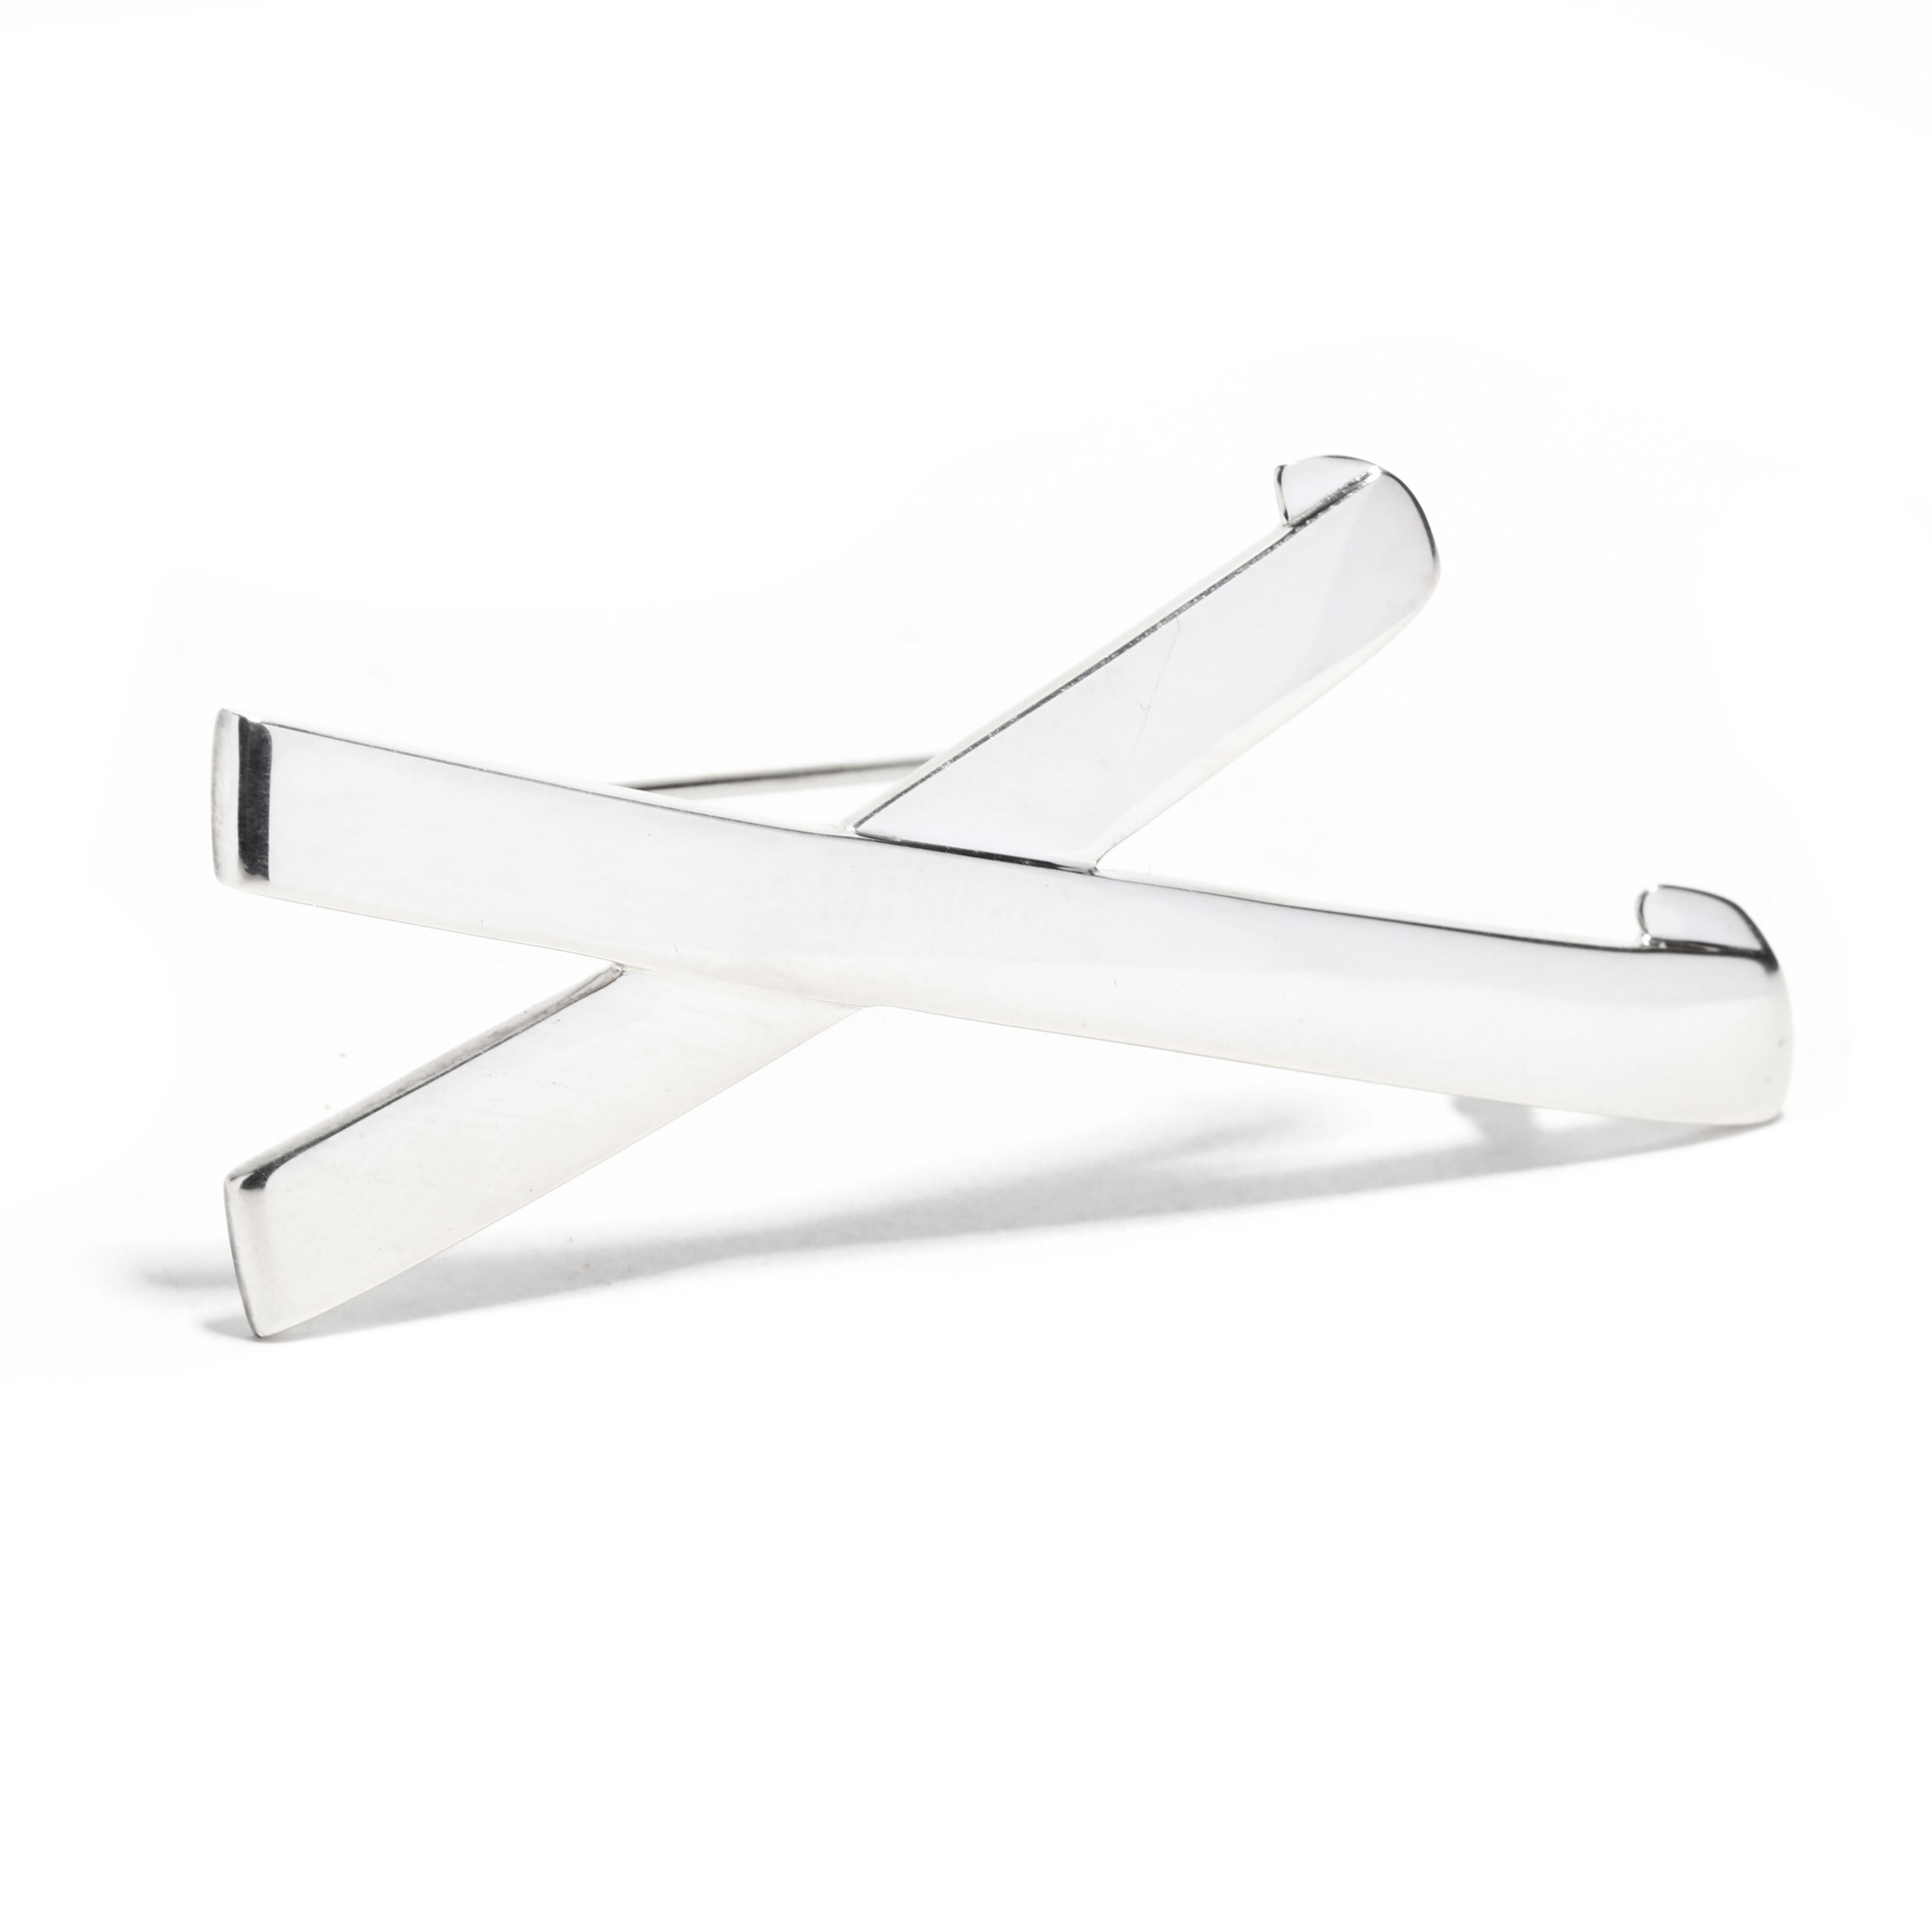 A Tiffany and Company Paloma Picasso sterling silver graffiti X brooch. This large silver brooch features a flat, overlapping X motif with a pin stem and C clasp.

Length: 2.5 in.

Width: 1 1/8 in.

Weight: 7.8 dwts. / 12.1 grams

Stamps: 1985